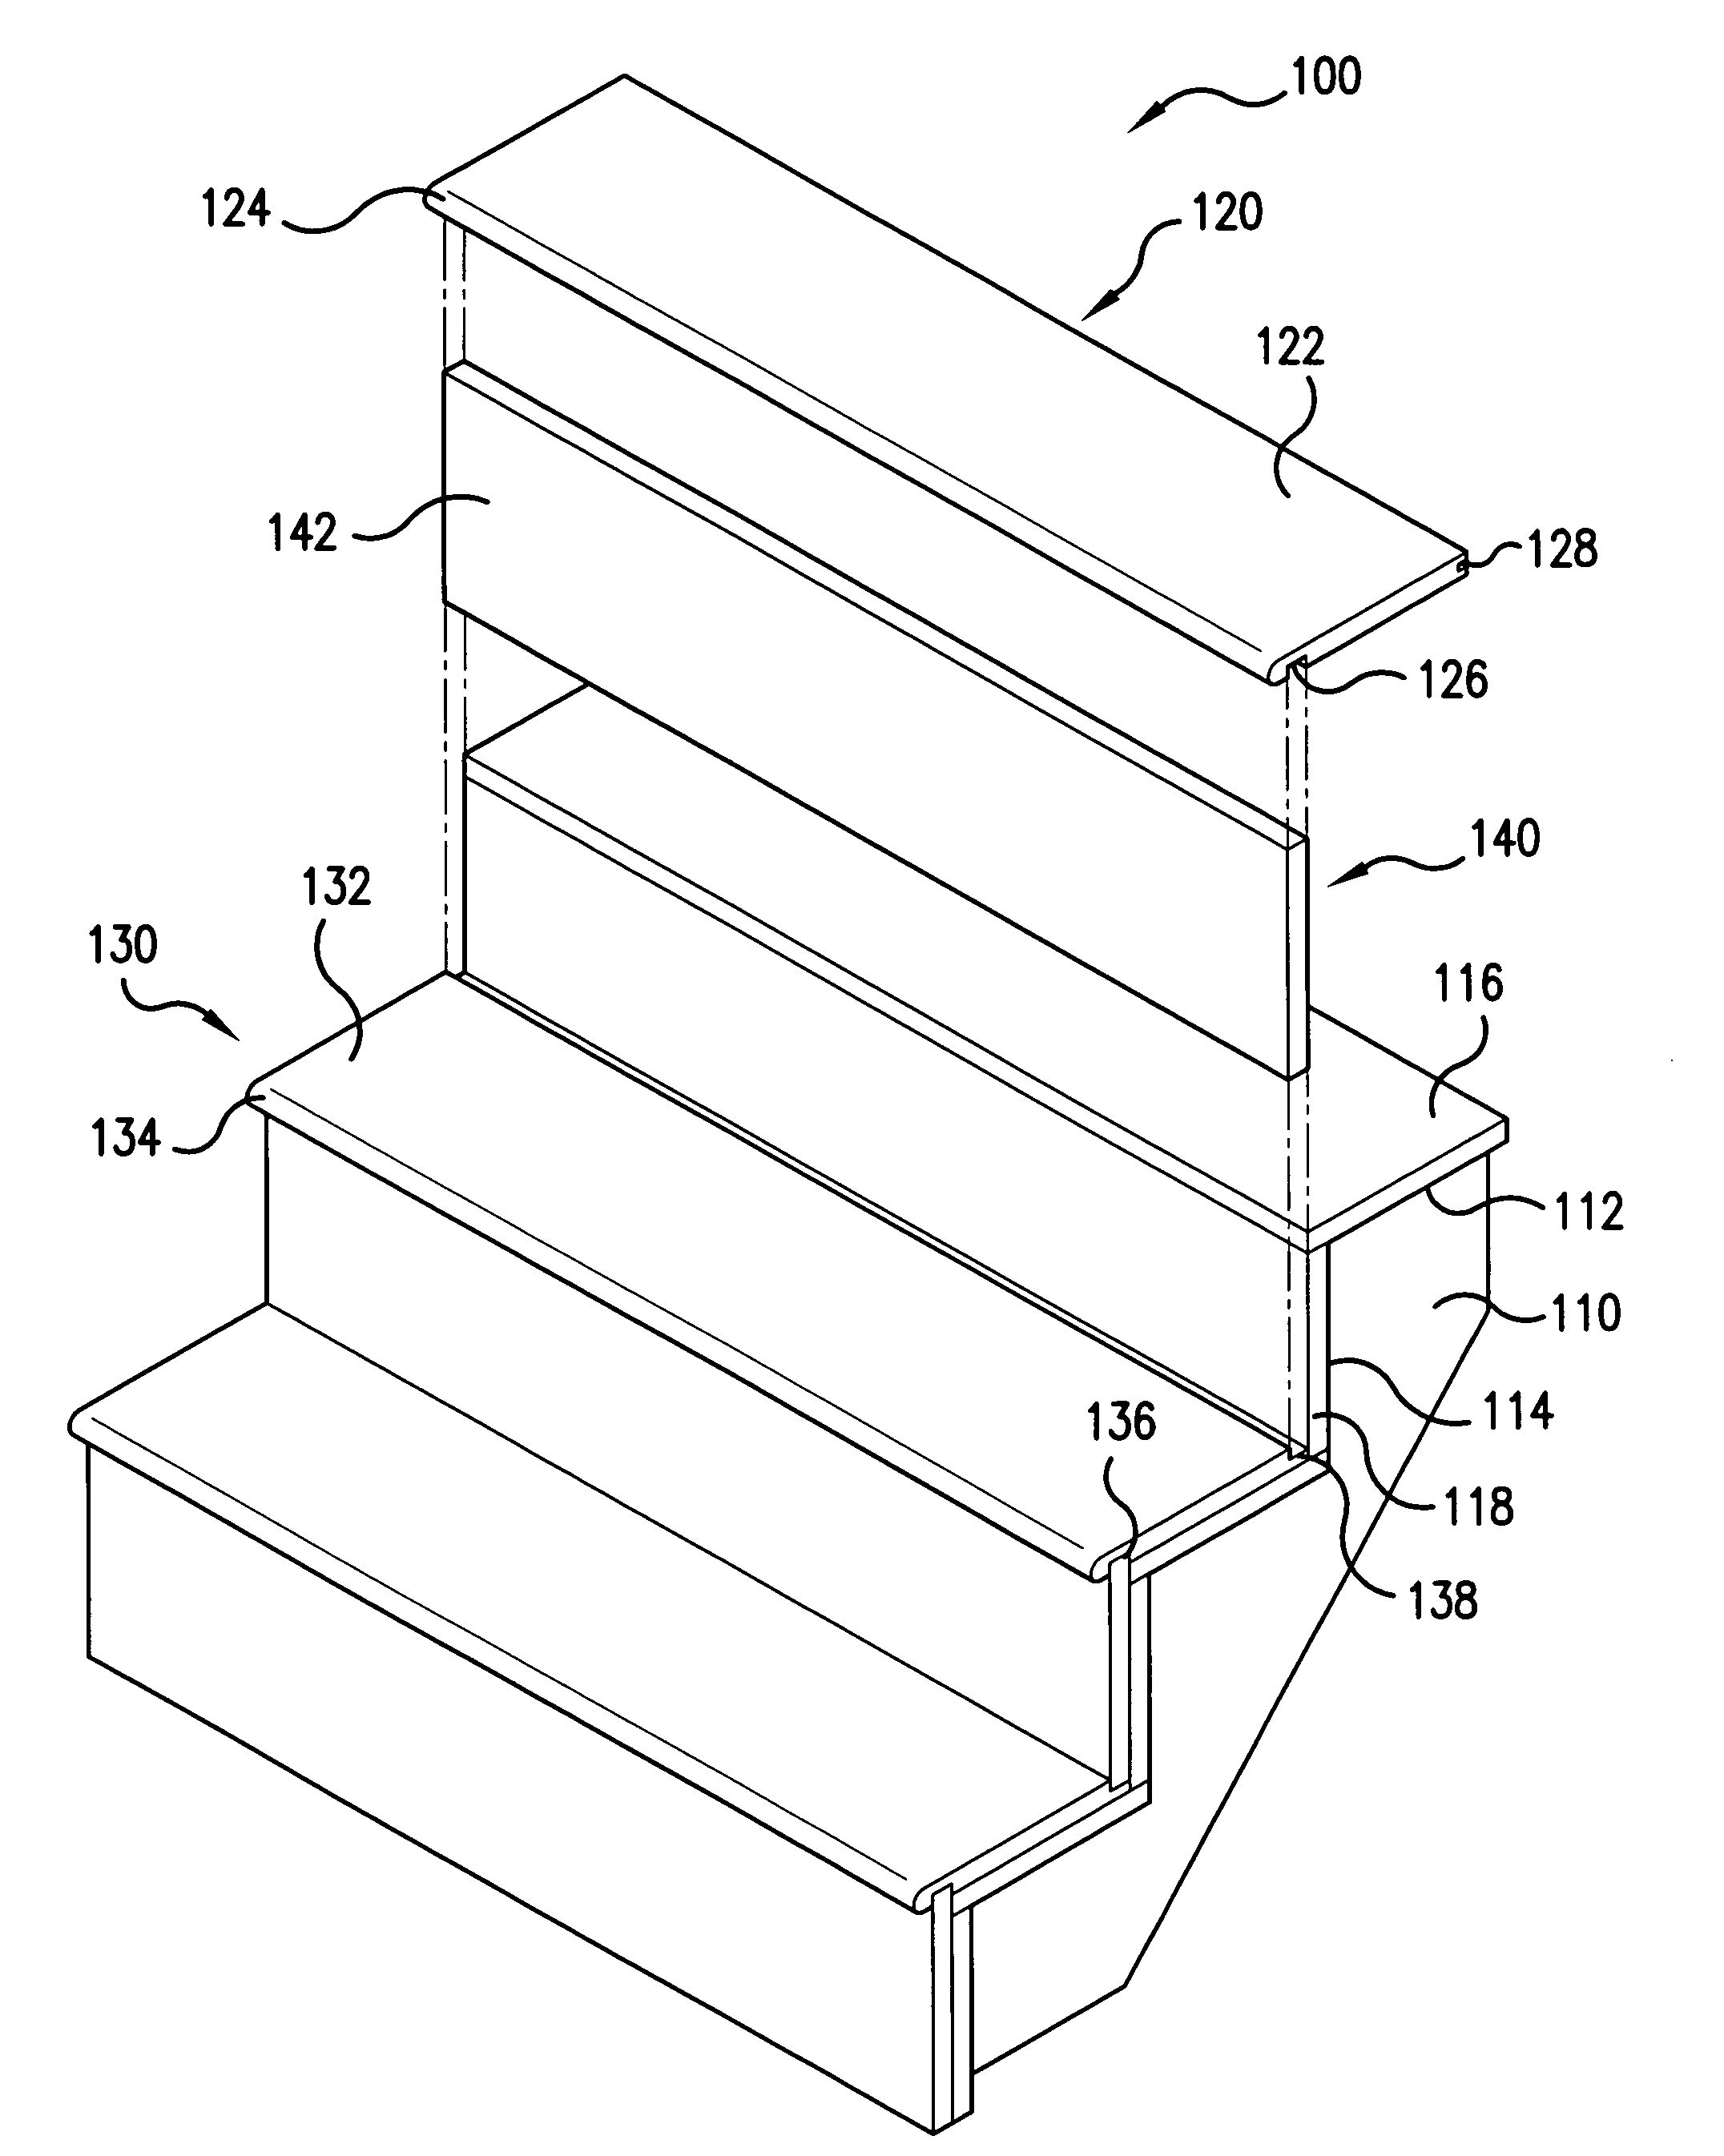 Stair system